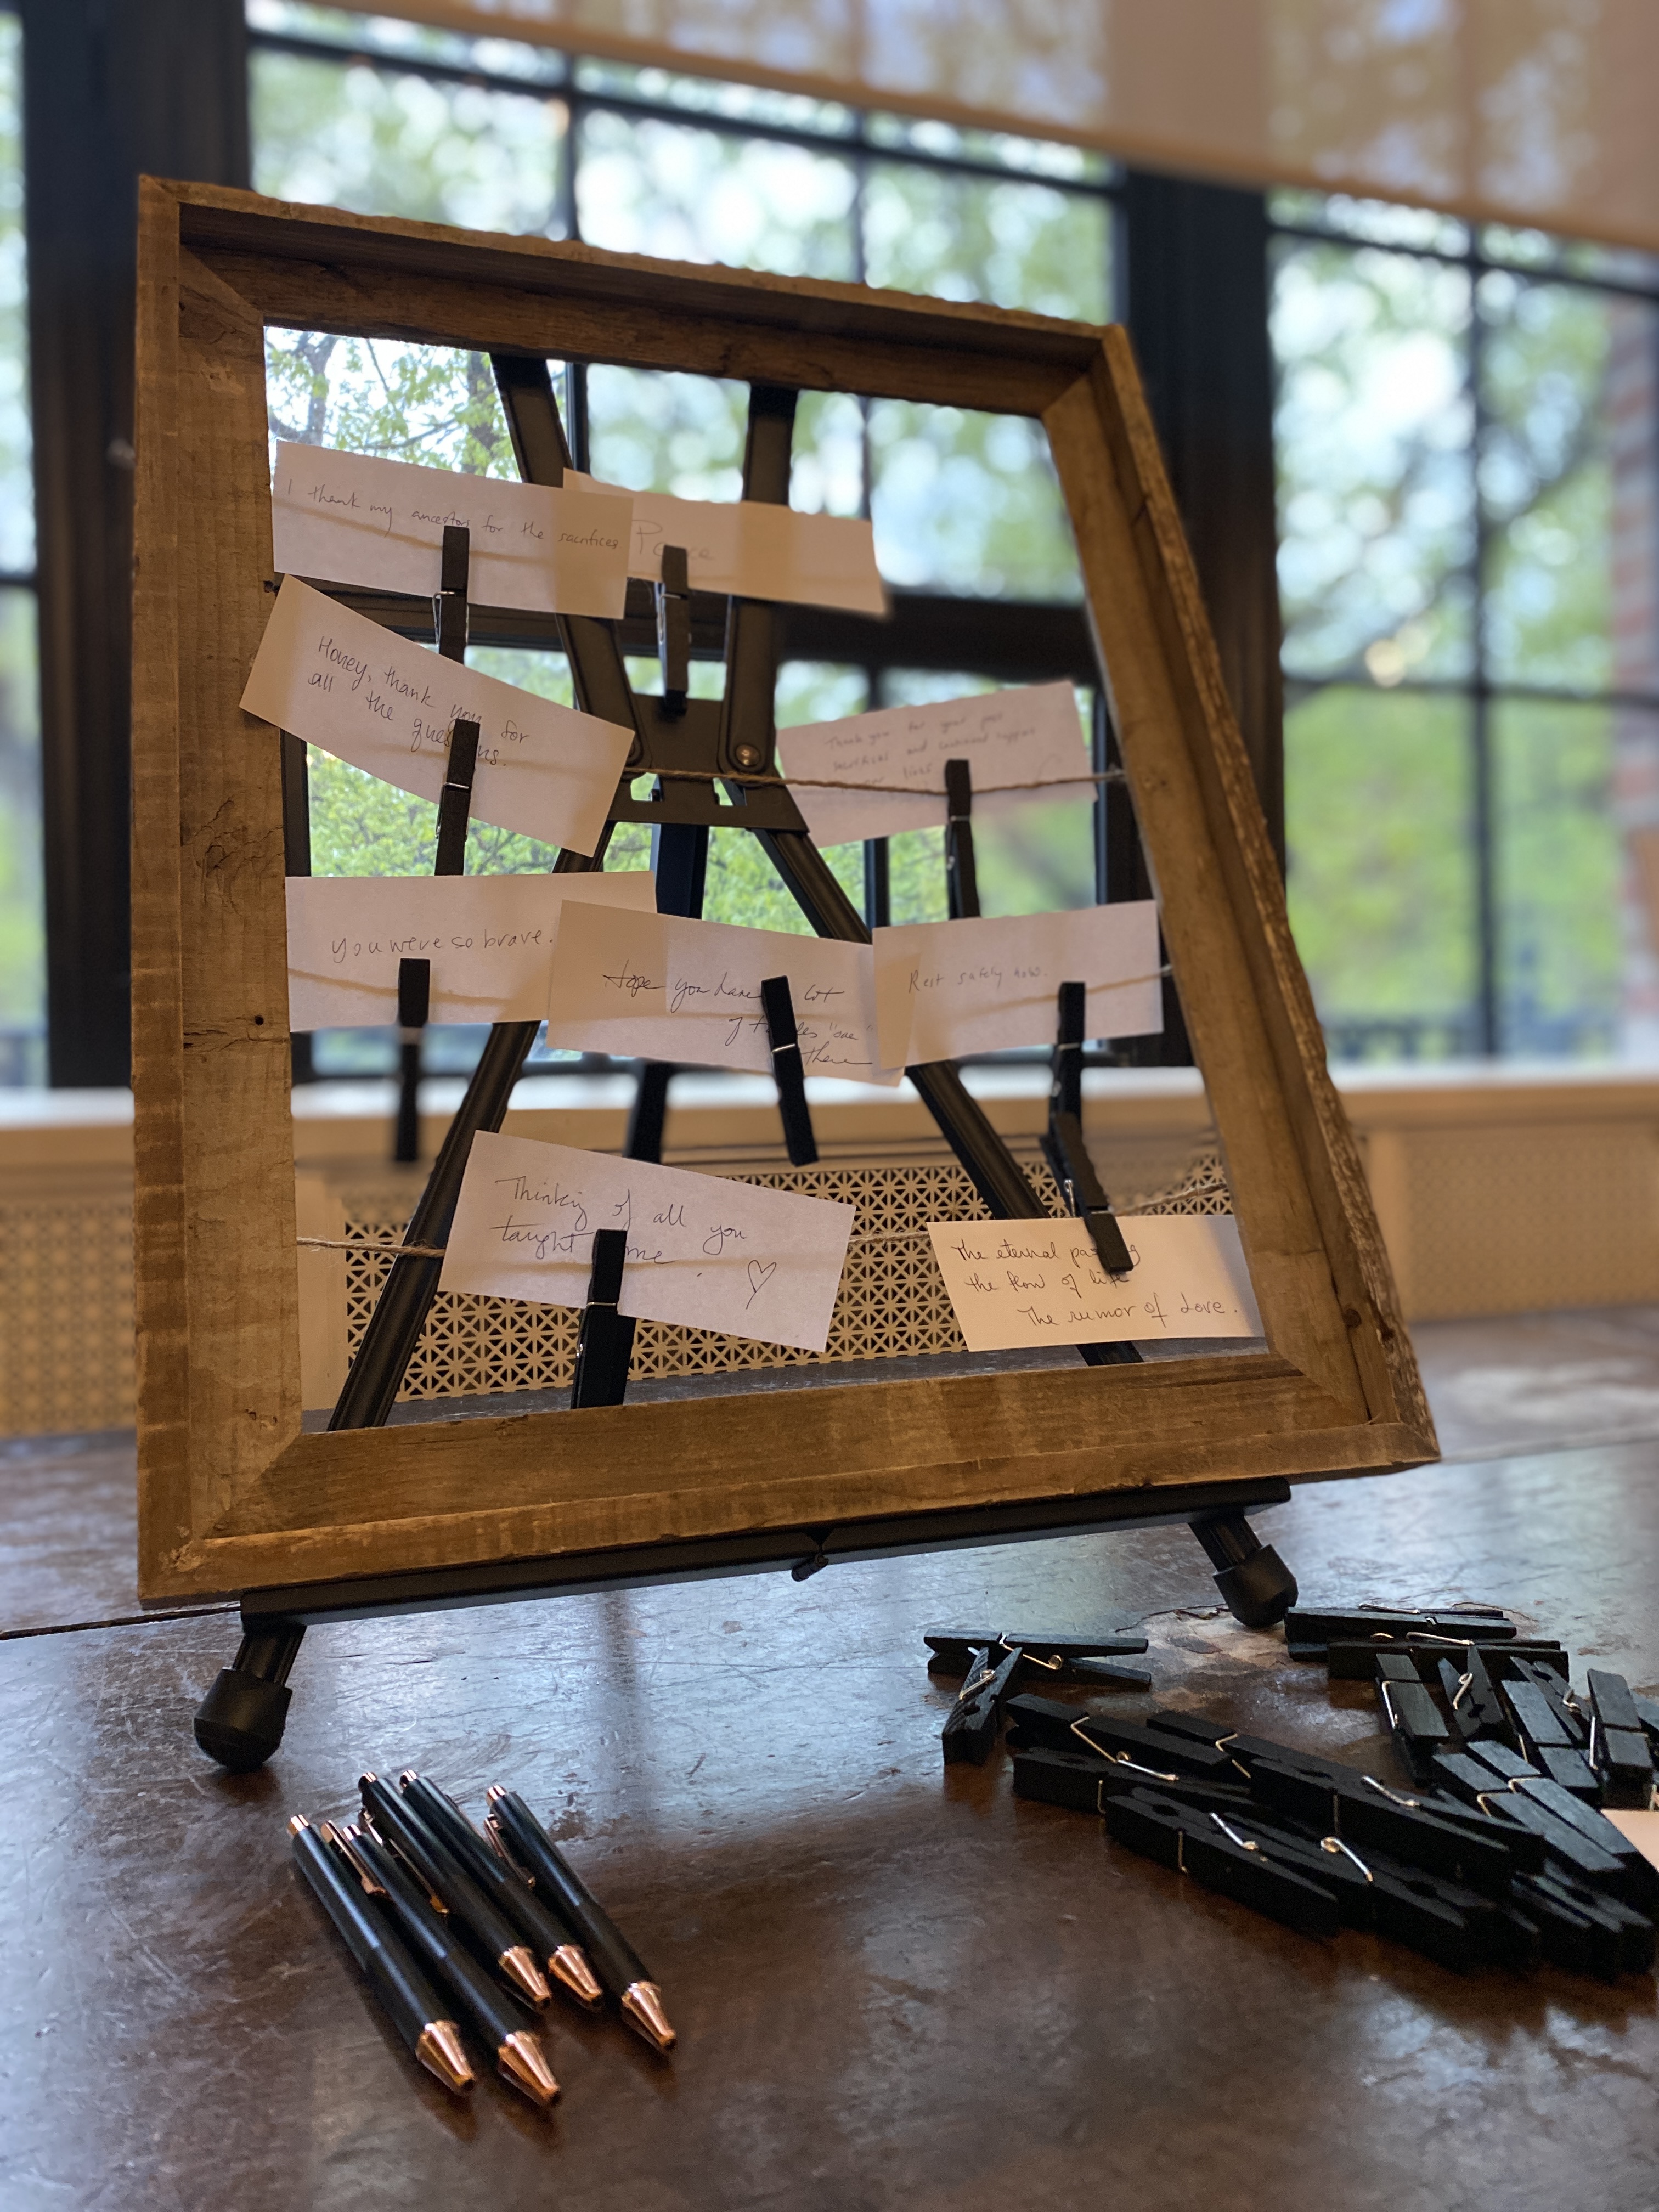 Wood frame with notes pinned to it using black clothes pins